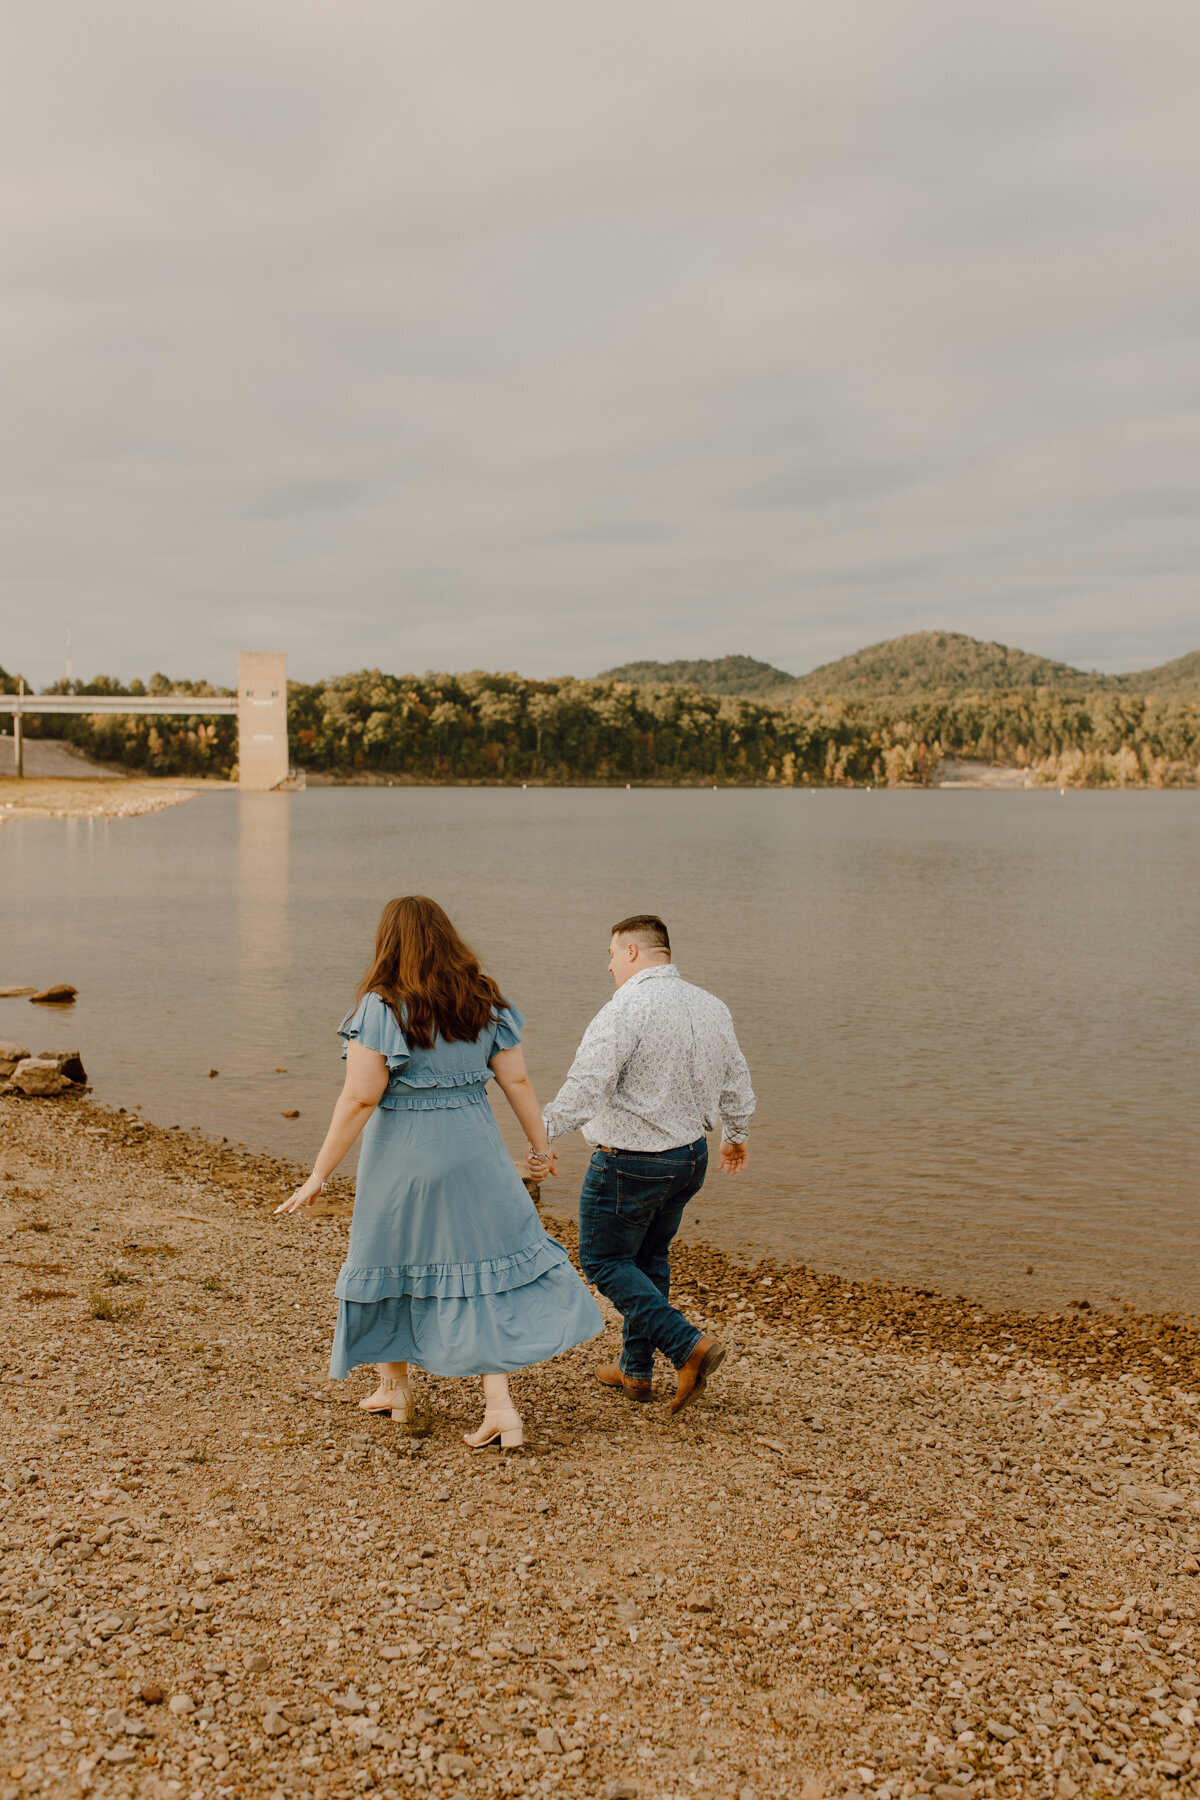 Kentucky Wedding Photographer, Couples Photographer, Winchester, Mt Sterling, Mount Sterling, Morehead, West Liberty, Paris, Irvine, Stanton KY